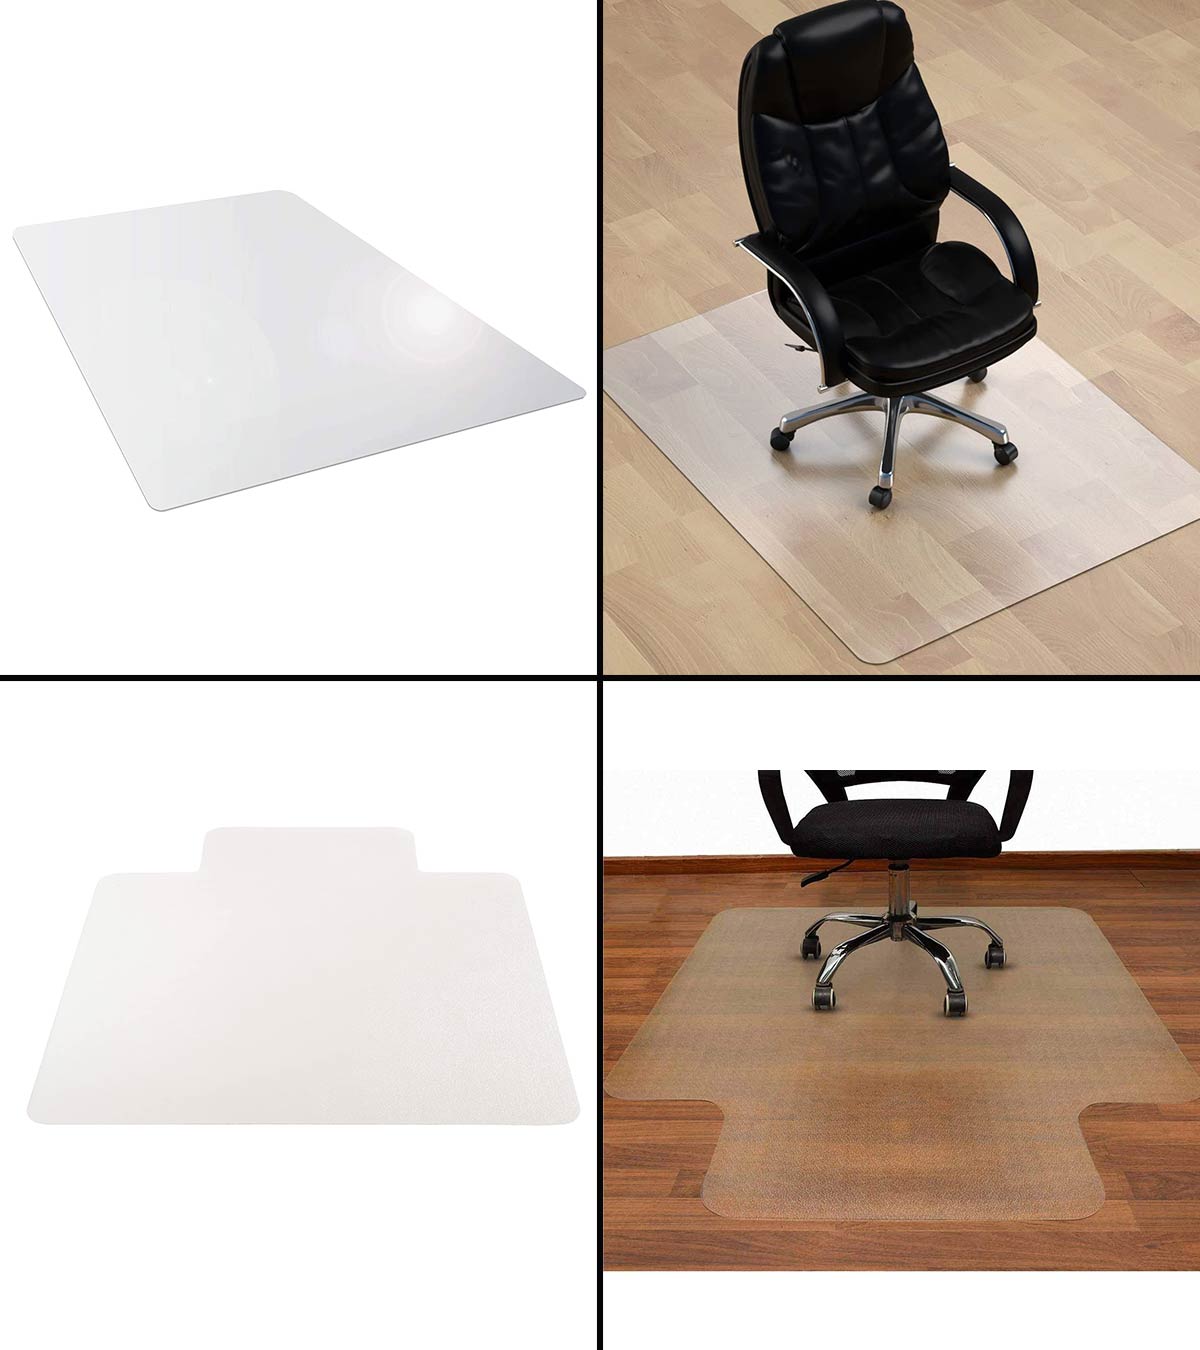 Easy to Clean Seven-first Office Chair Mat for Hardwood & Tile Floor black Computer Chair Mat for Gaming Under Desk Chair Protector Mats for Rolling Chair Black 48 Inches×36 Inches Anti-Skid 